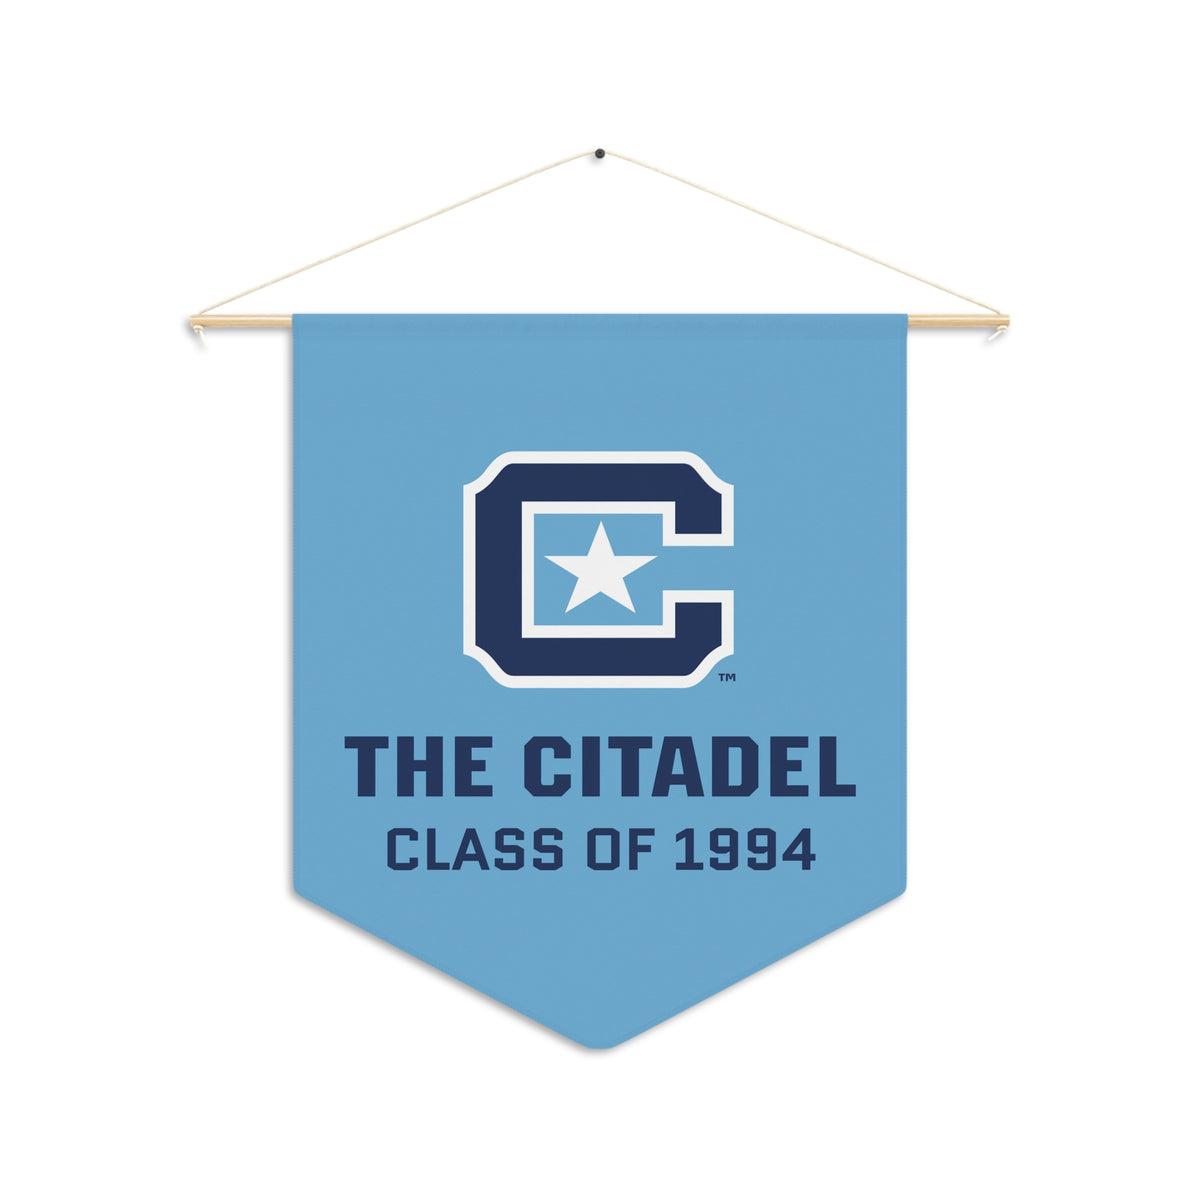 The Citadel, Class of 1994 Wall Pennant